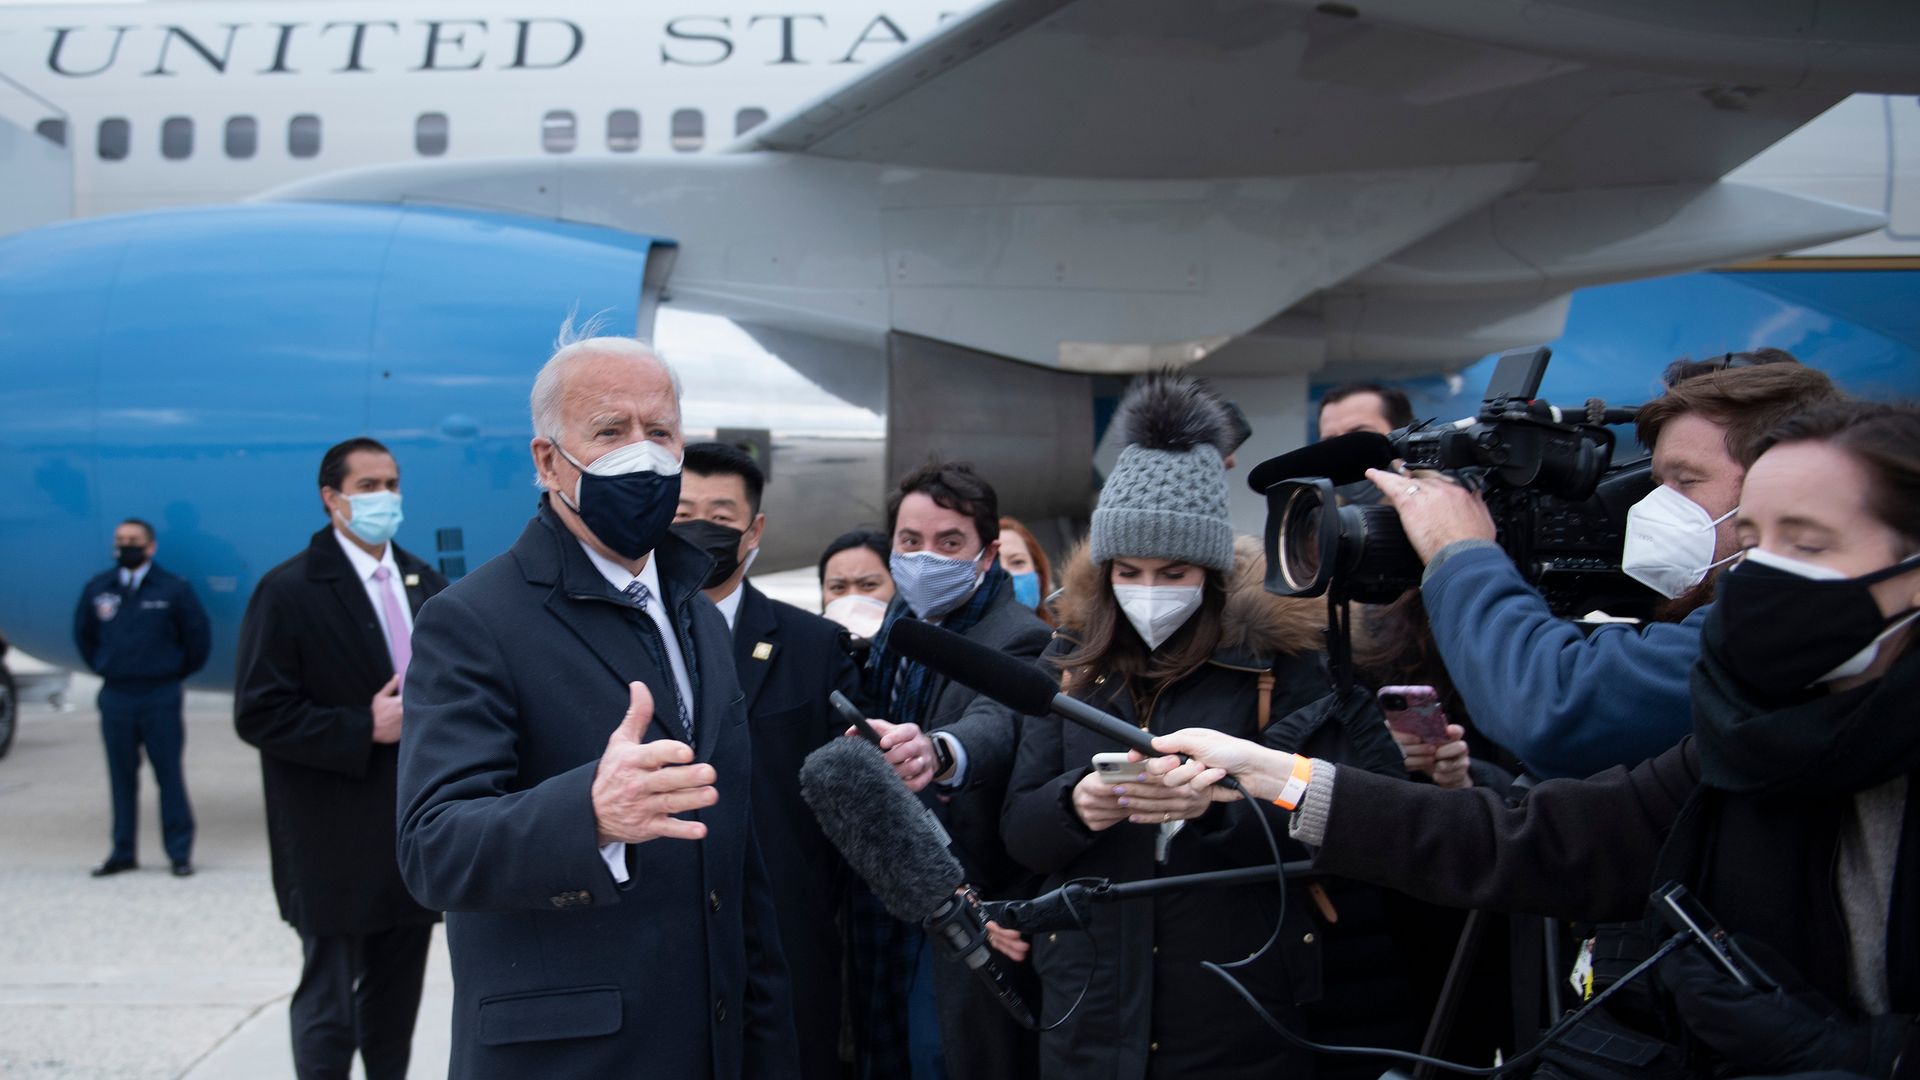 President Biden is seen speaking with reporters assembled under the wing of Air Force One.